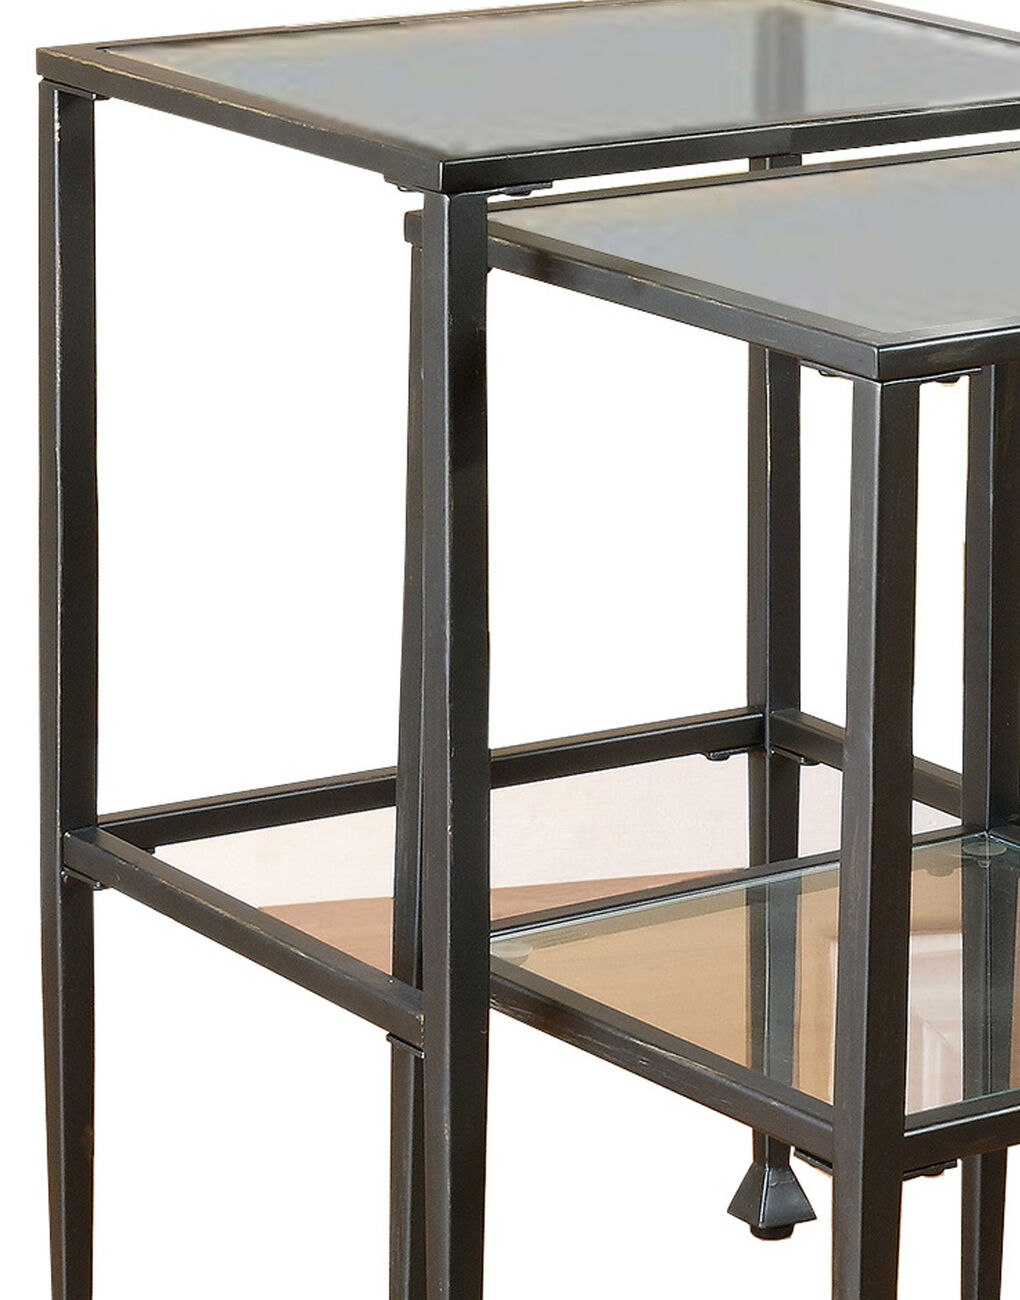 Set Of 2 Metal Nesting Tables With Glass Top, Black